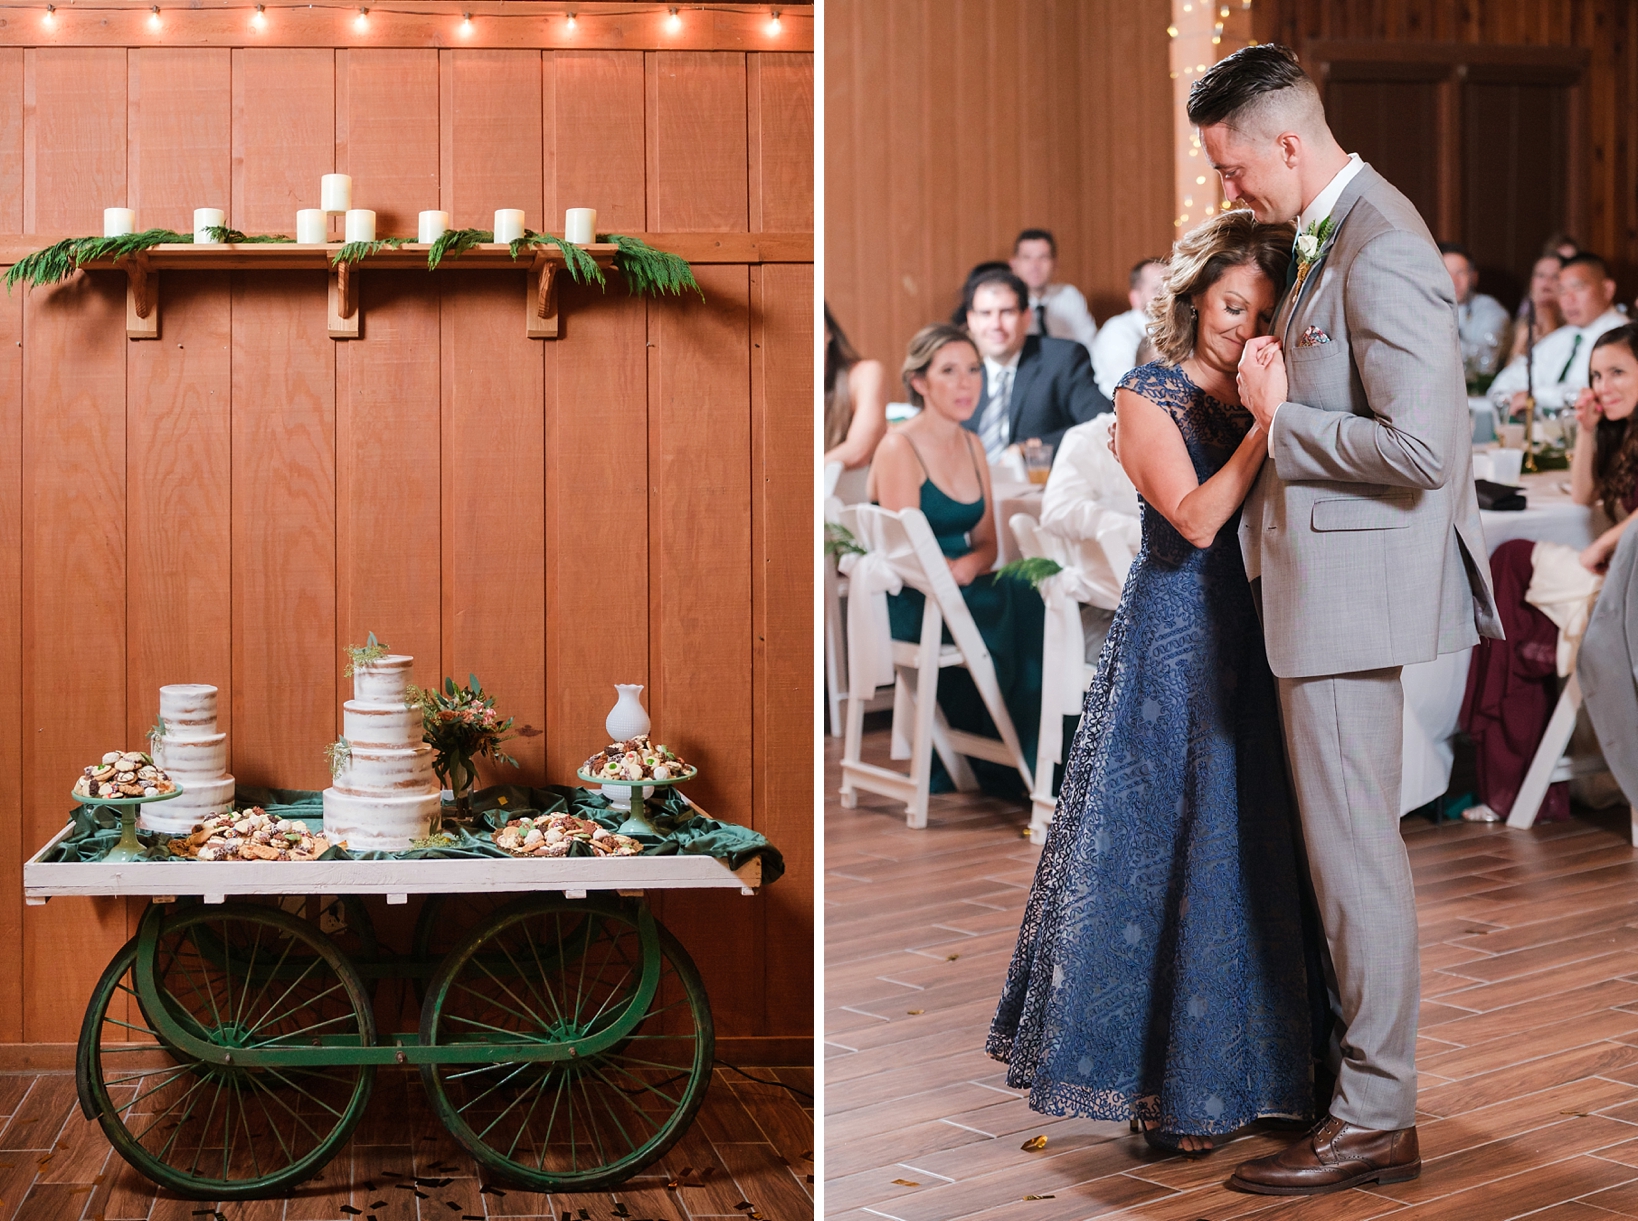 The wedding cake table on a wagon wheel and the Groom dancing with his Mother